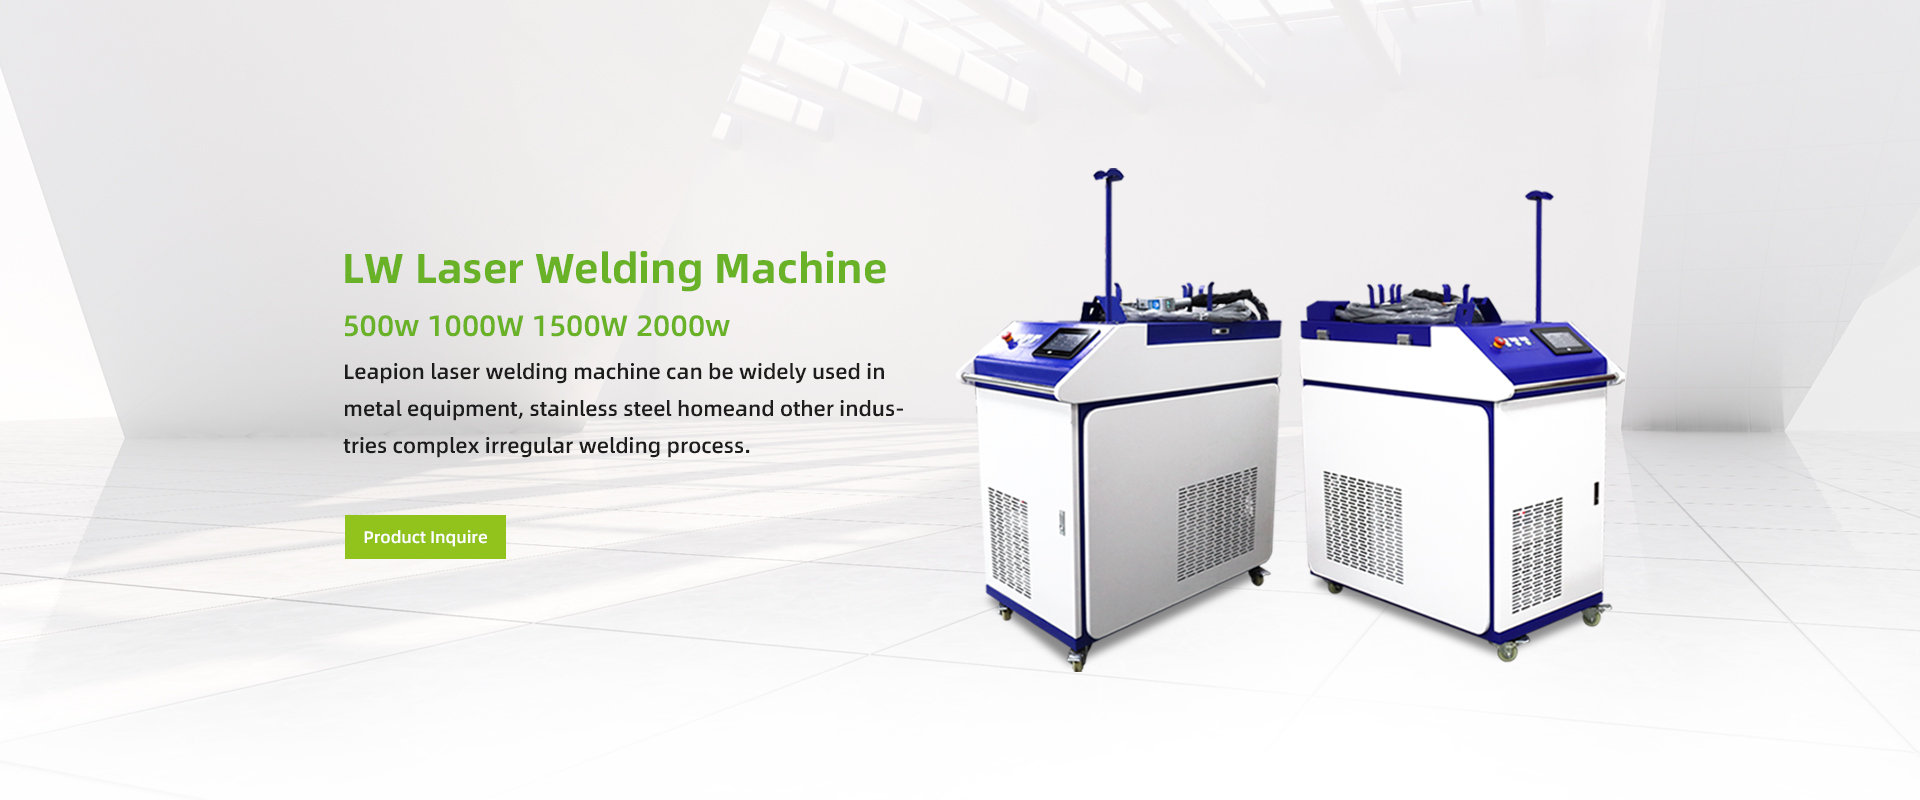 How is the application of laser welding machine in automobile manufacturing?